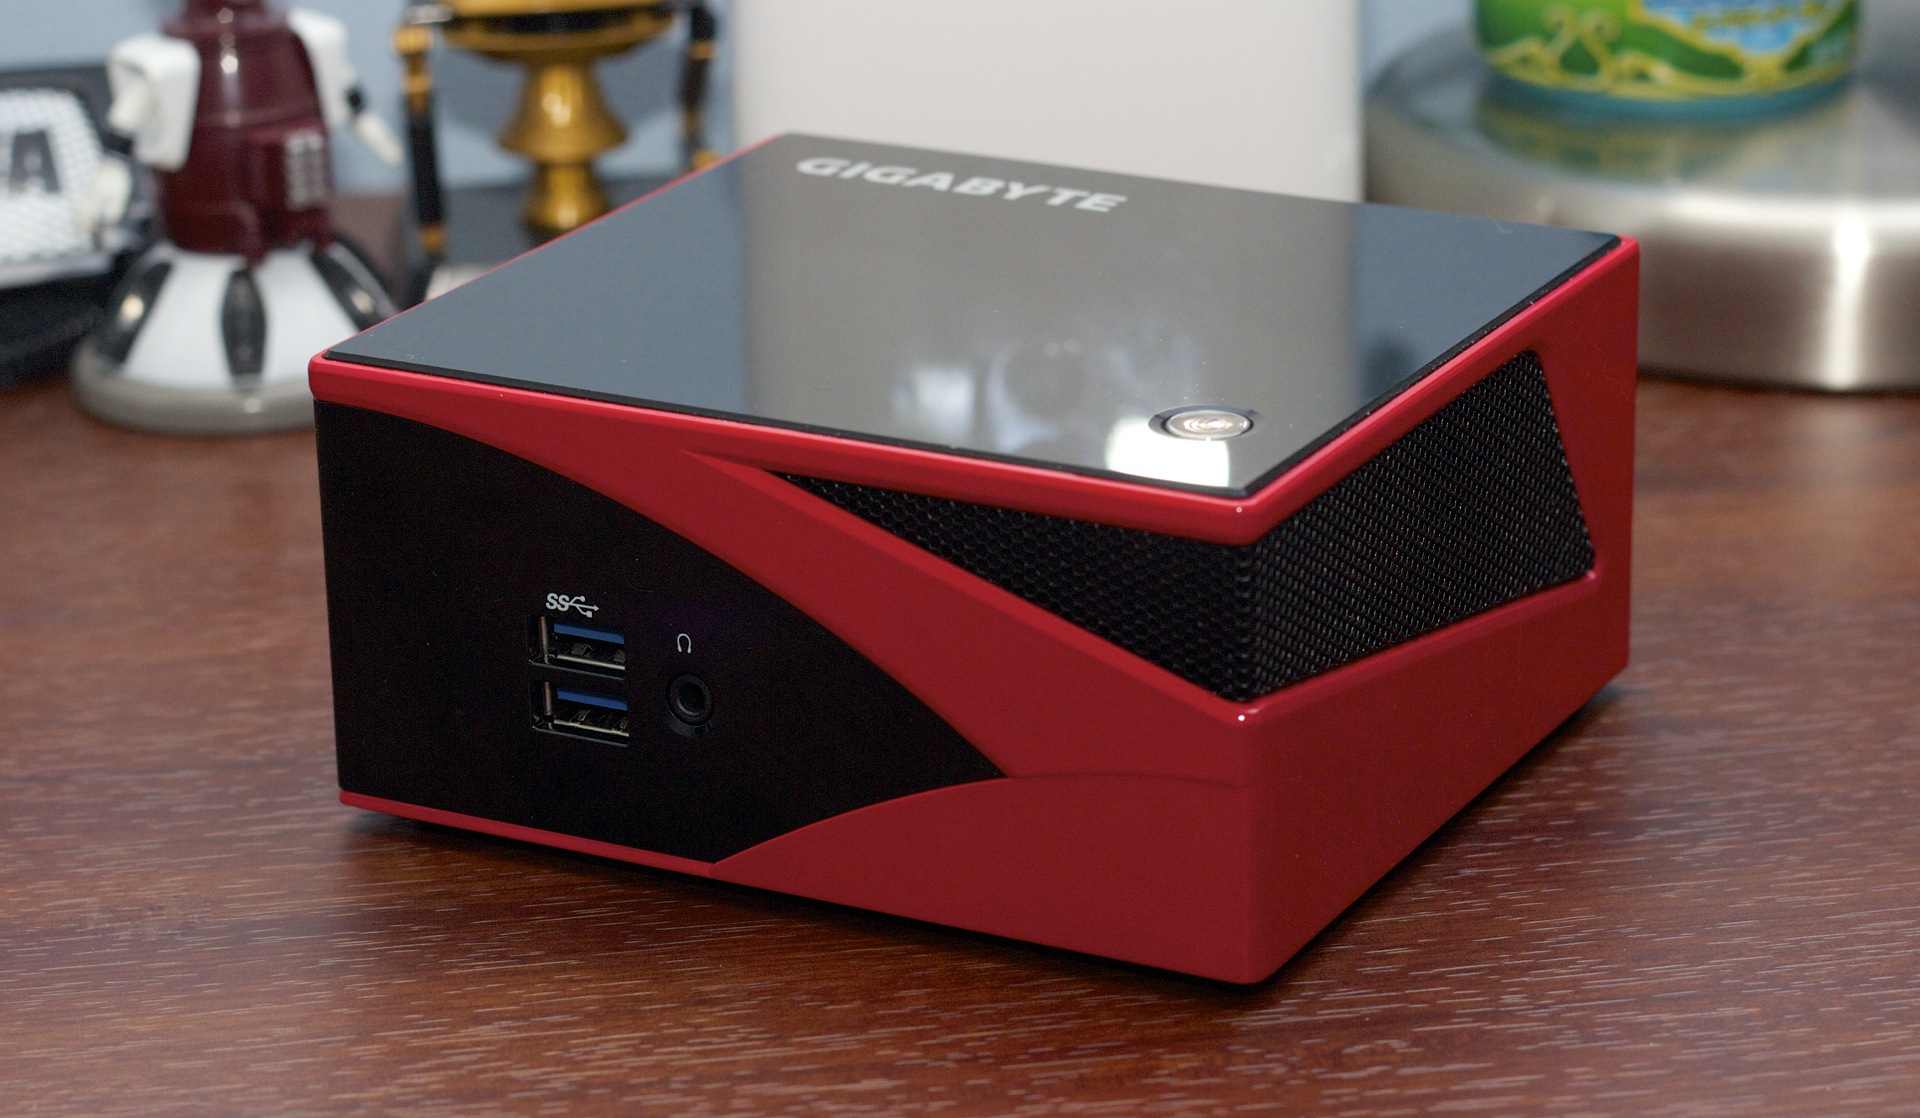 Are mini PC good for gaming?